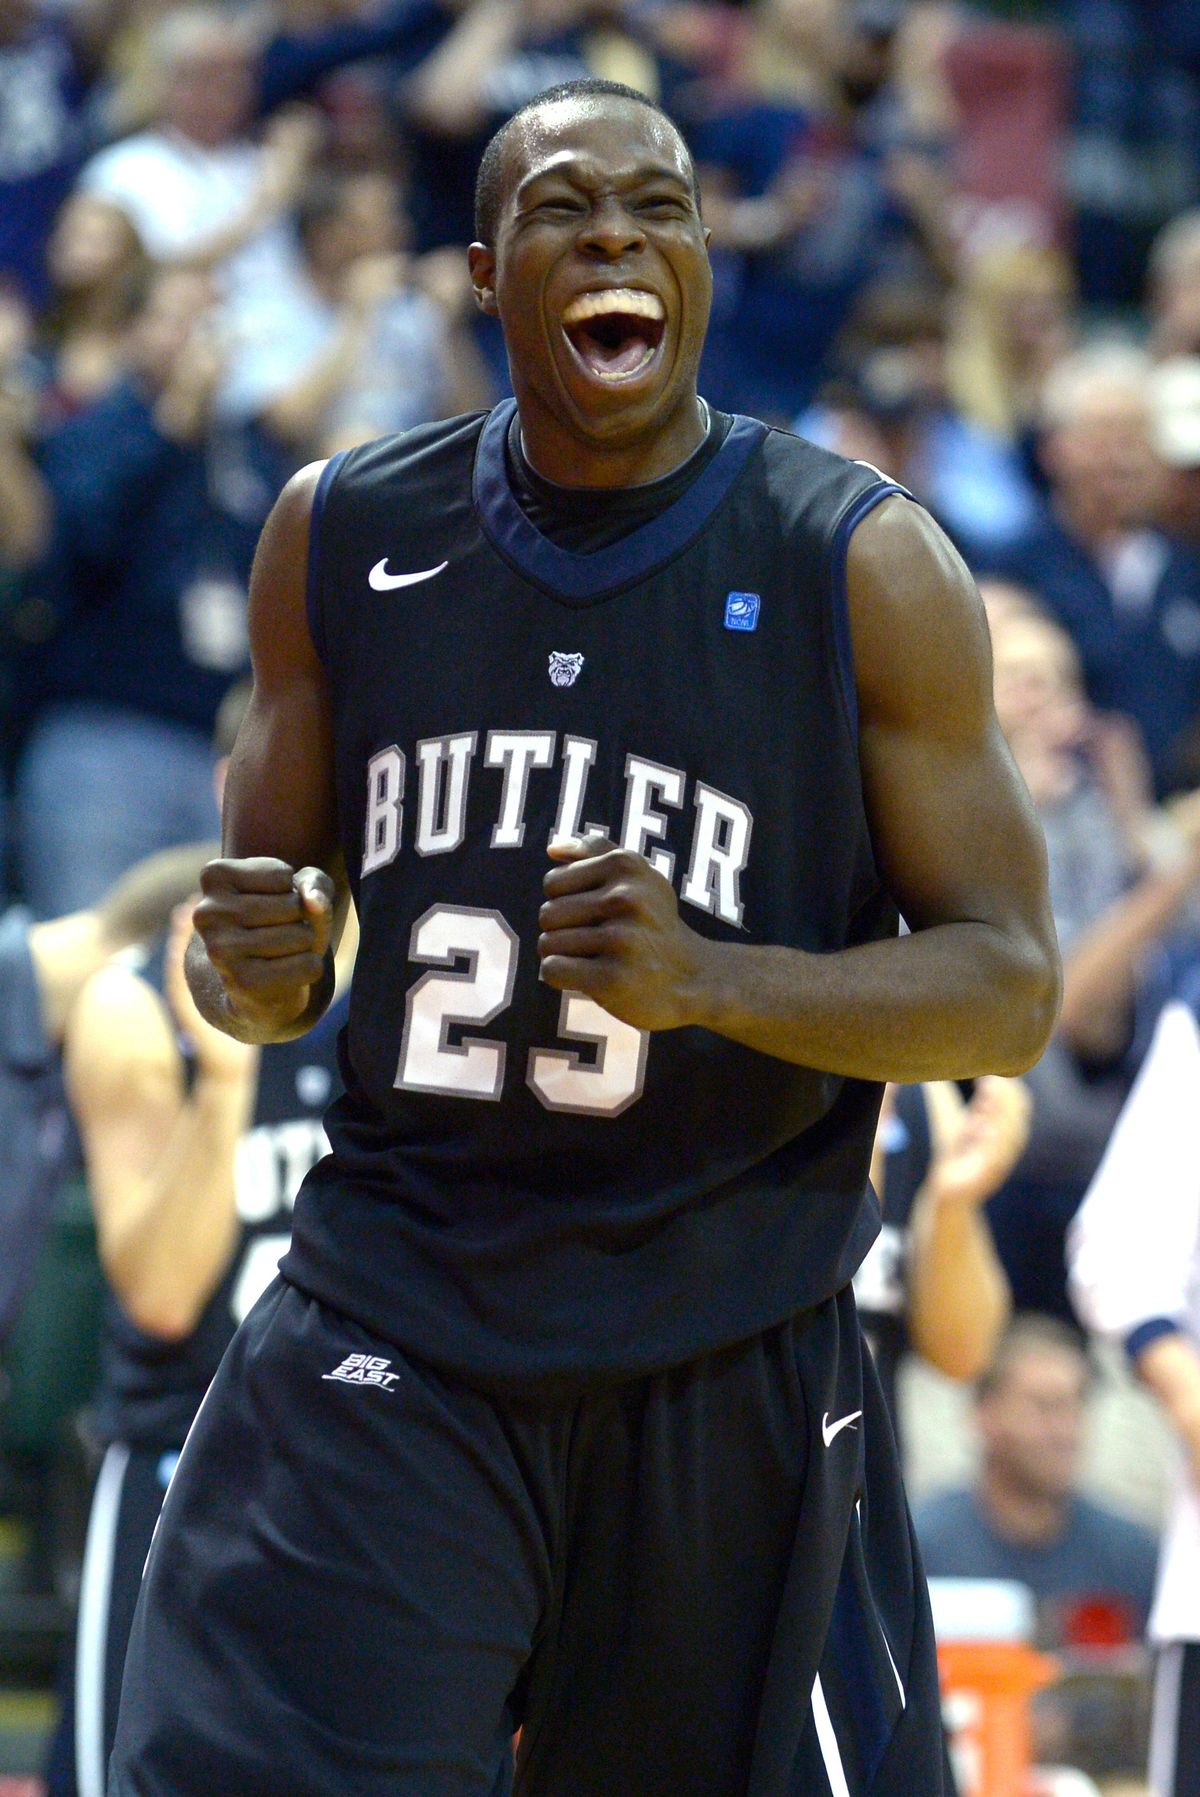 Forward Khyle Marshall was one of two Bulldogs to reach 30 points against WSU on Thursday. (Associated Press)